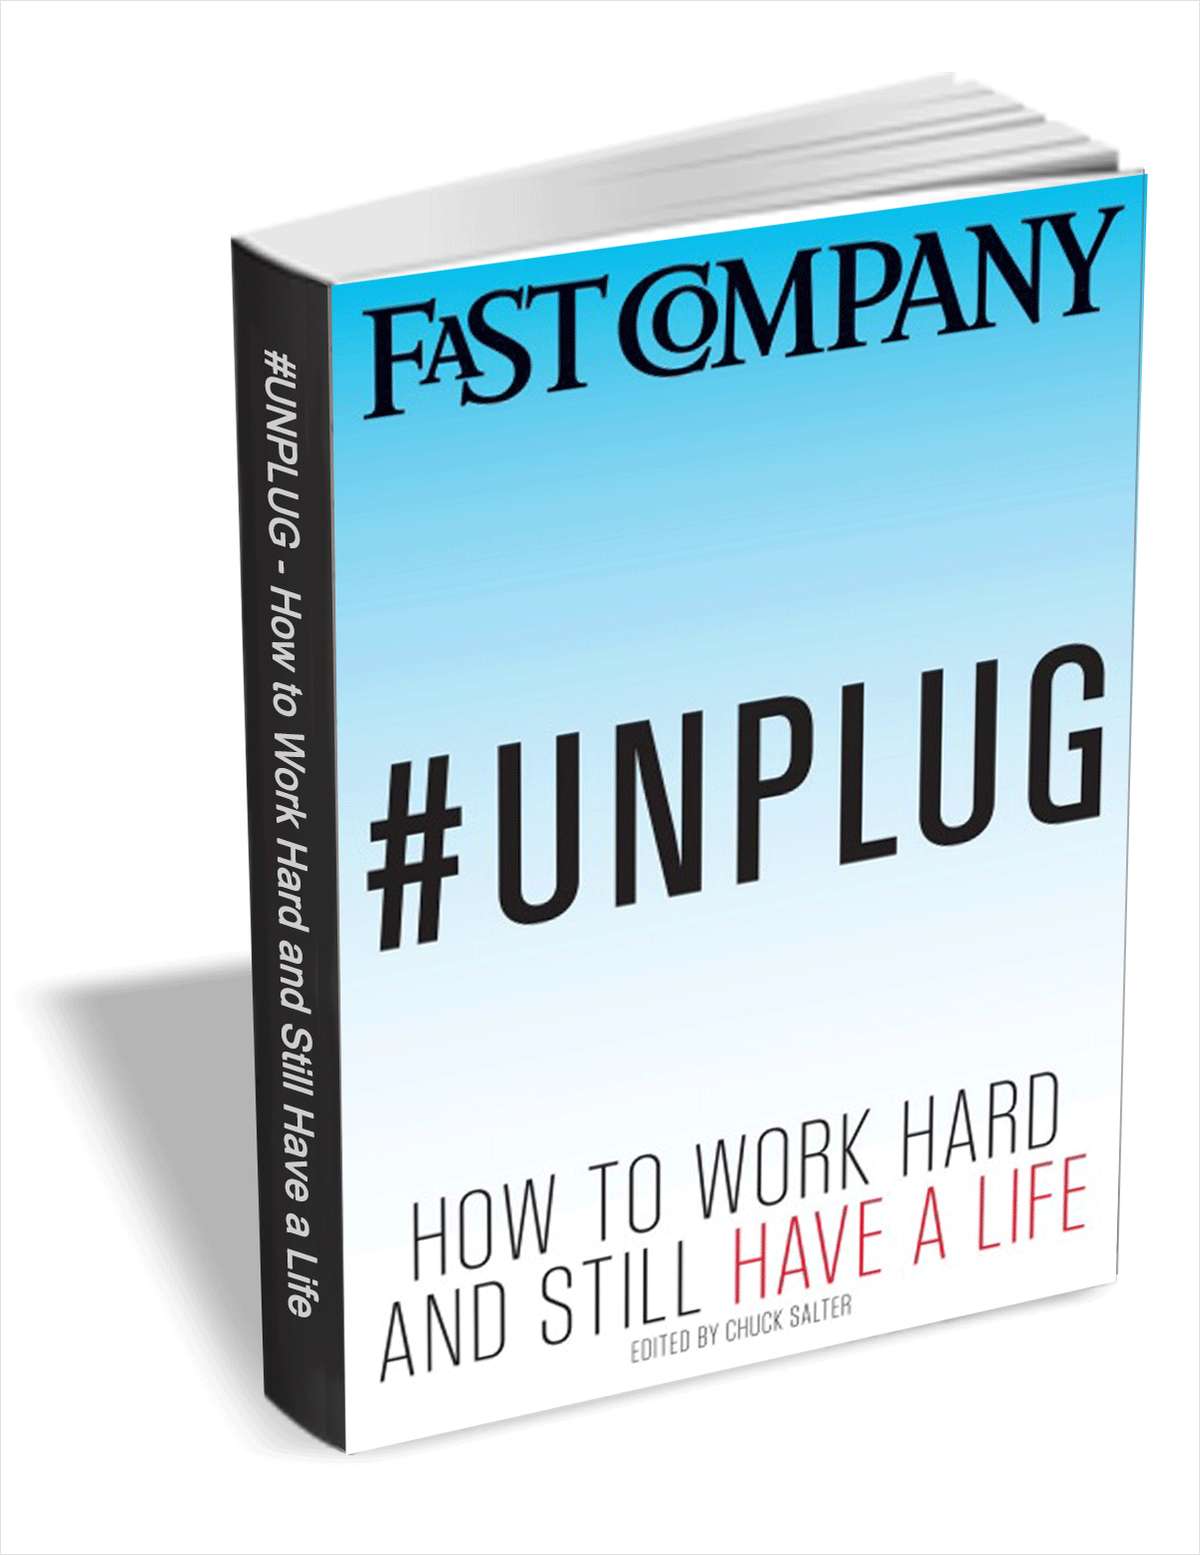 #Unplug - How to Work Hard and Still Have a Life